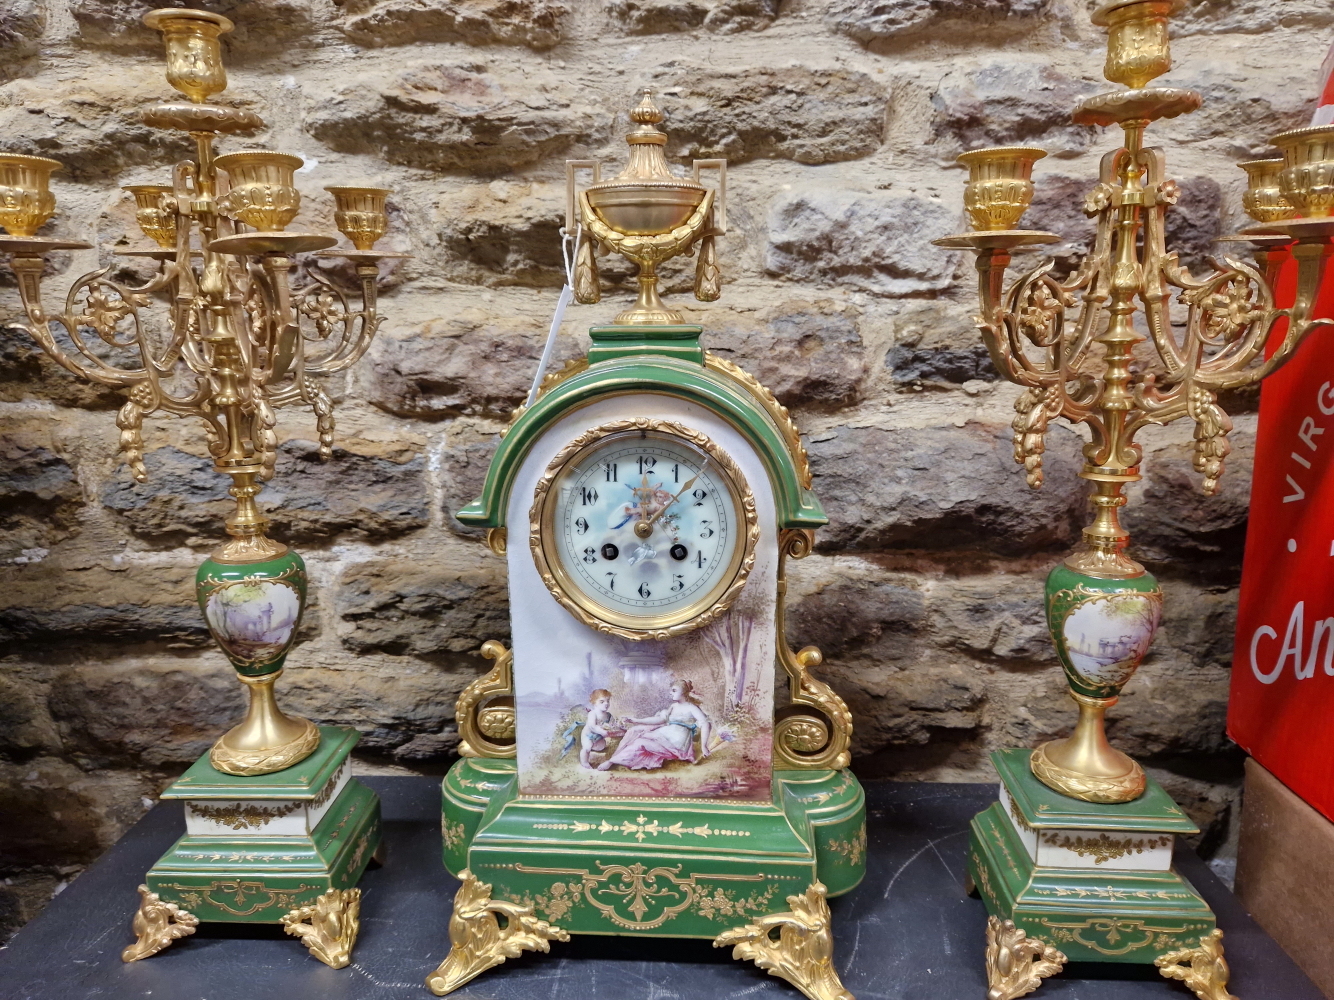 A LATE 19th/EARLY 20th C. FRENCH APPLE GREEN AND GILT PORCELAIN CLOCK GARNITURE, THE CLOCK WITH